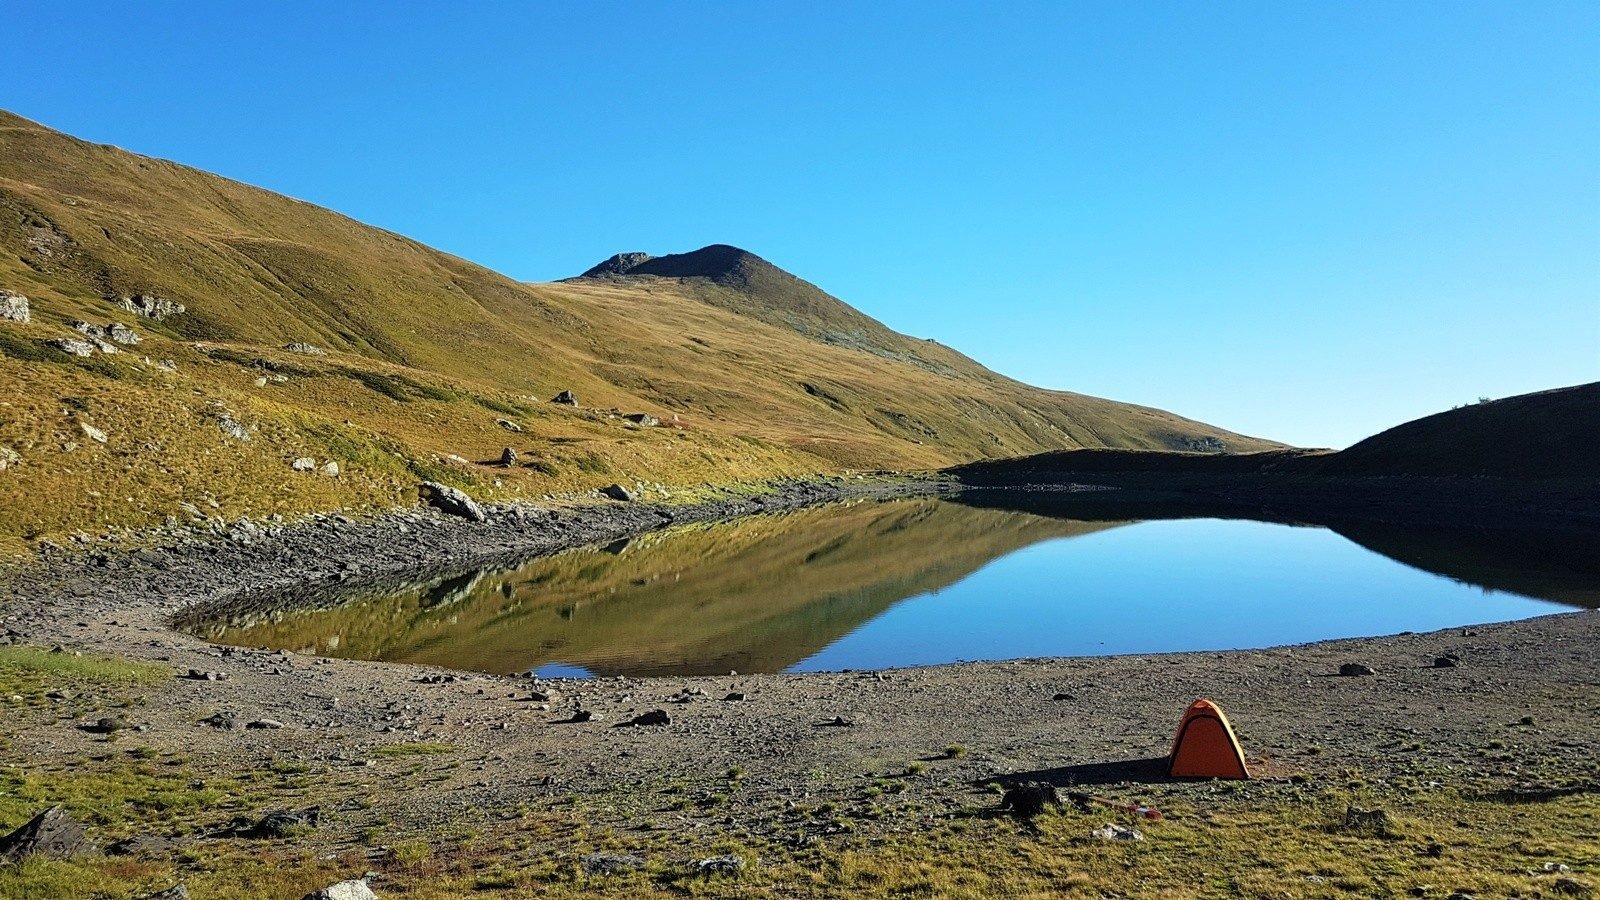 A tent near a small lake - an ideal wild camping spot.